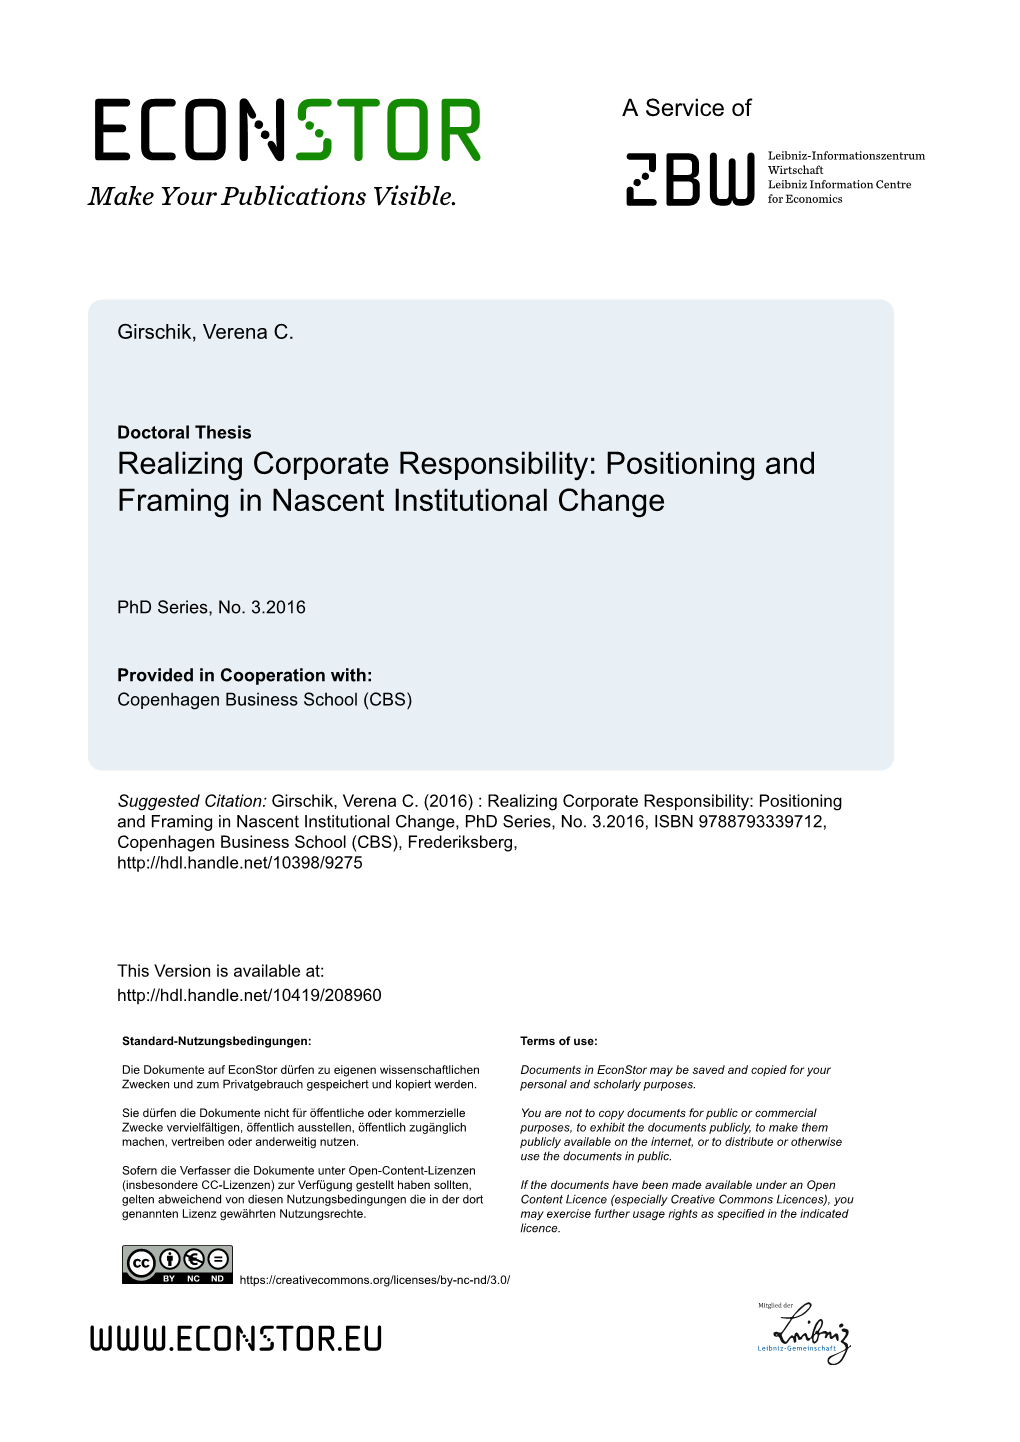 Realizing Corporate Responsibility: Positioning and Framing in Nascent Institutional Change